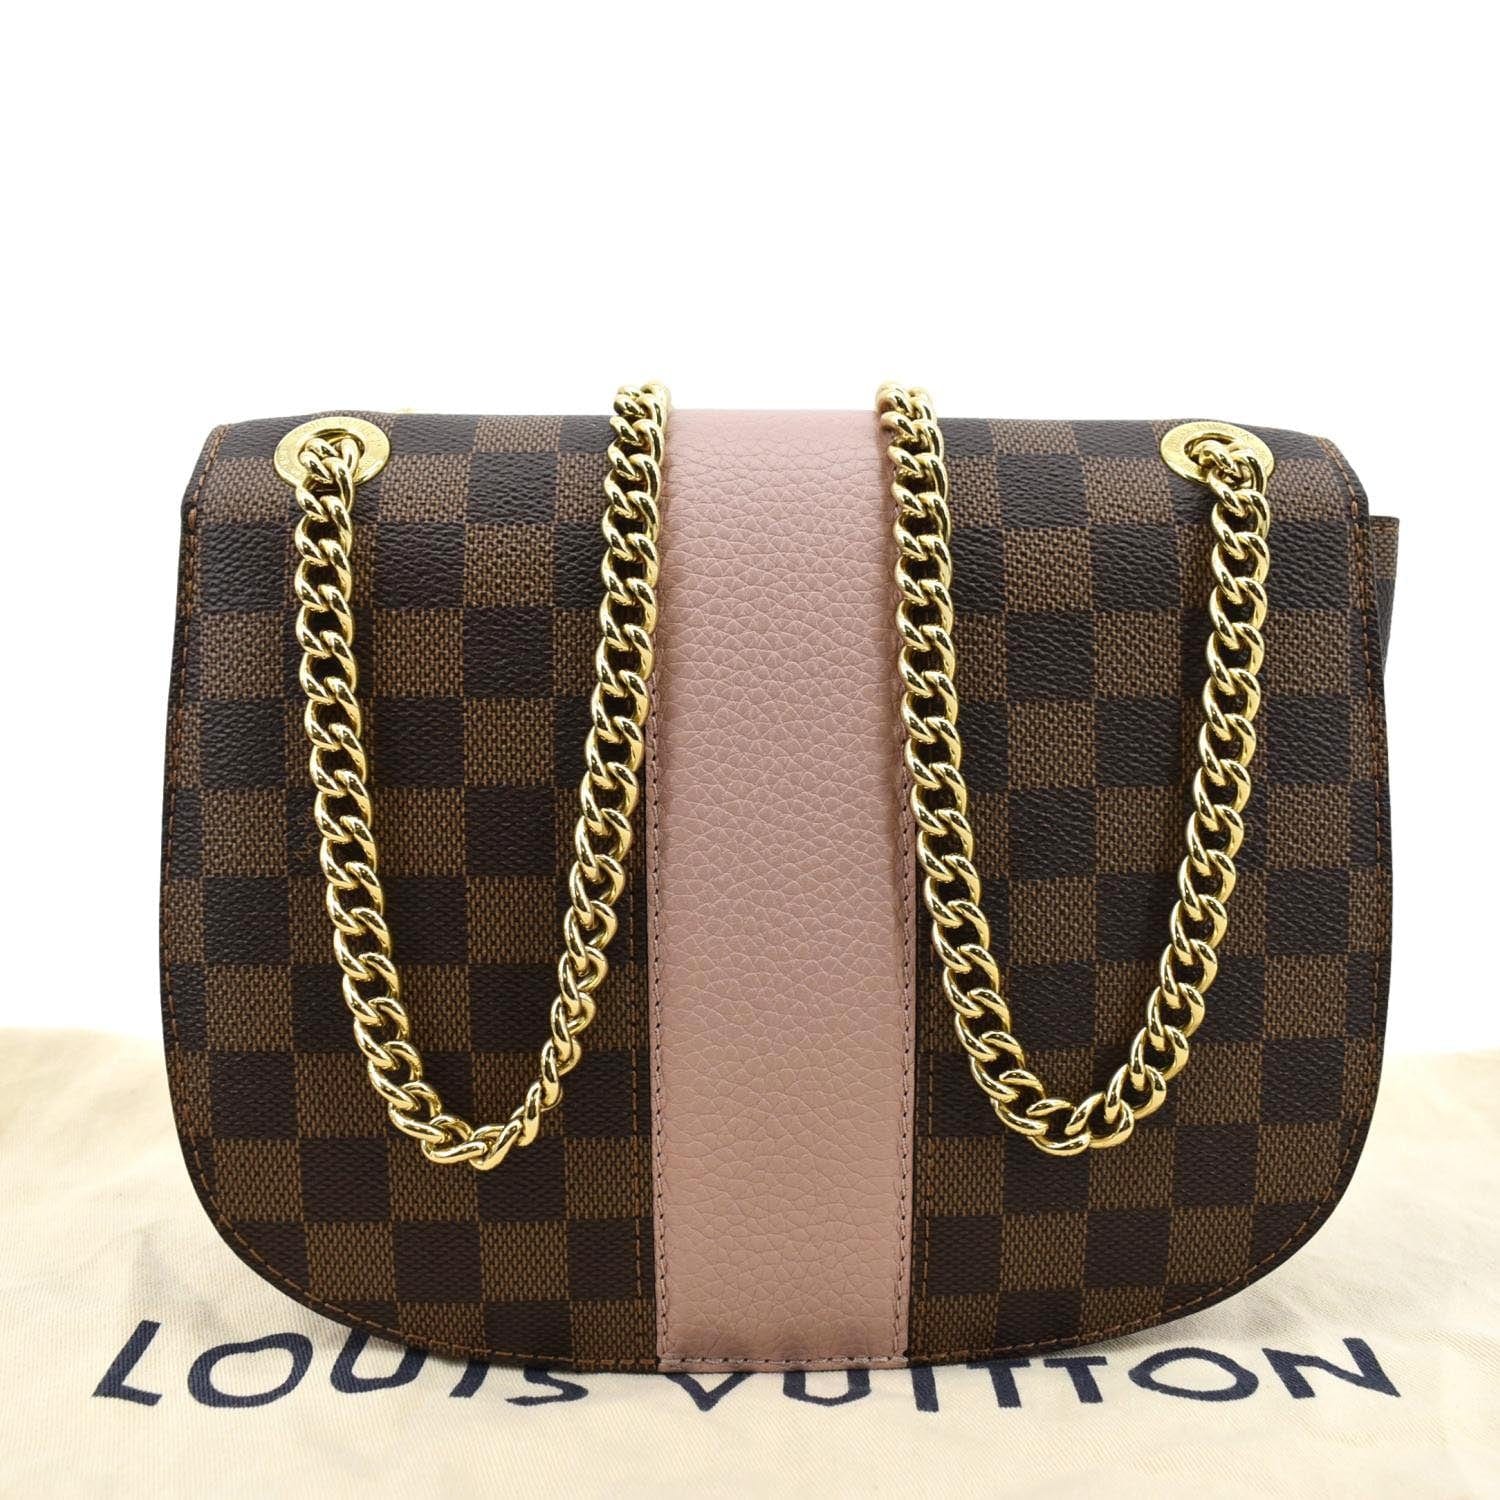 Willowbridge Shopping Centre - This iconic LOUIS VUITTON bag could